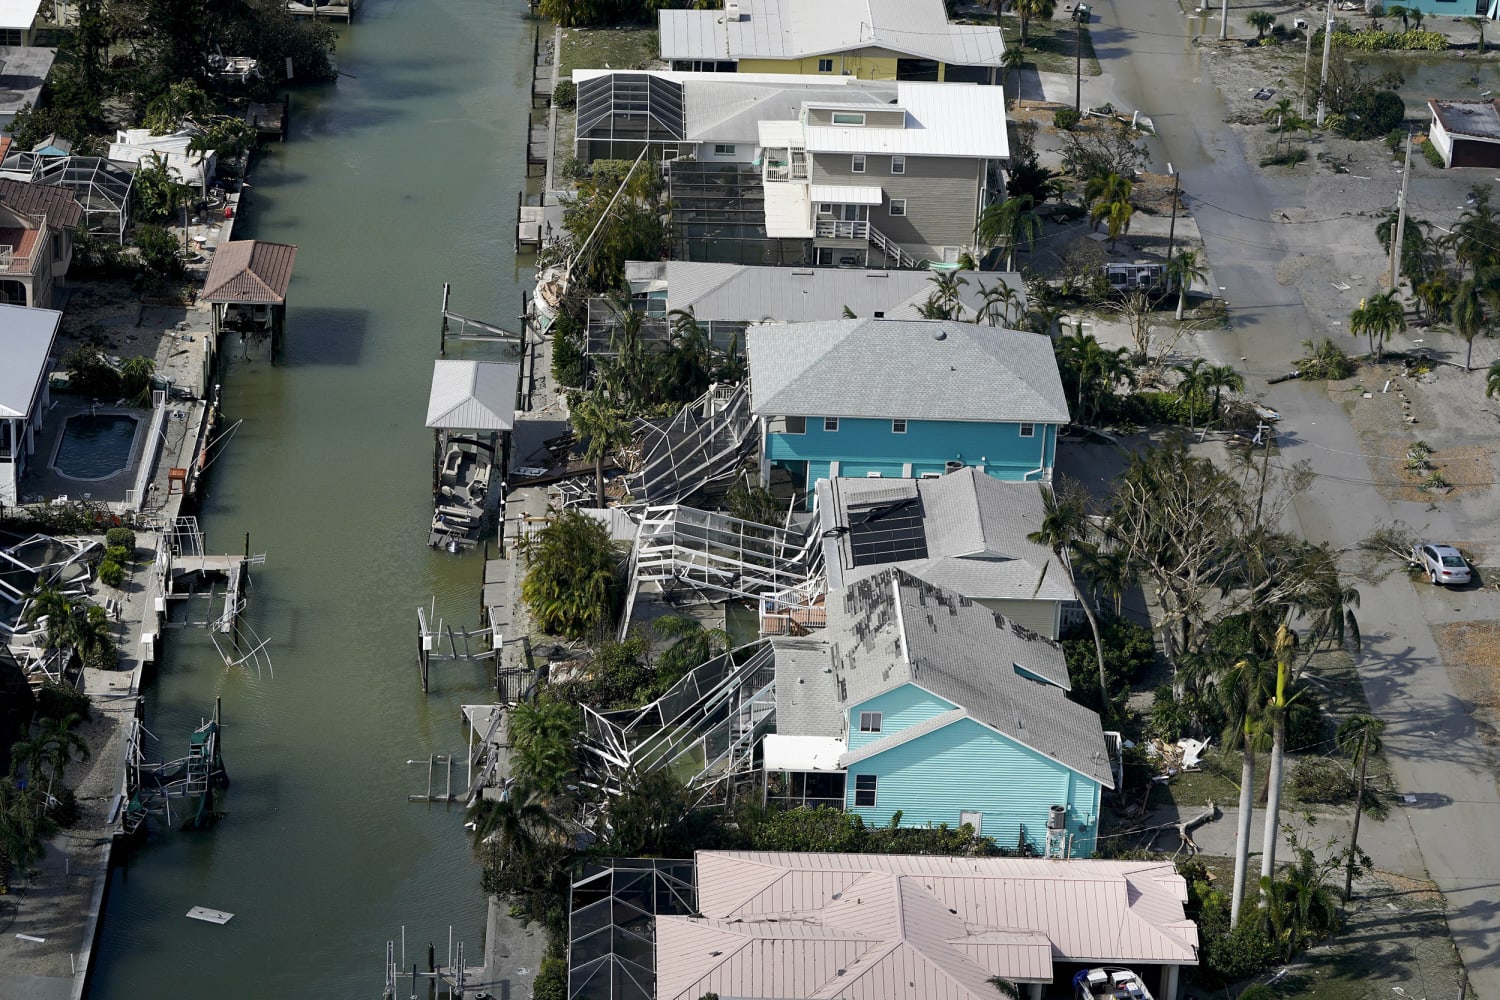 Hundreds of thousands of Florida homes lie in flood-risk areas not  recognized by FEMA's flood maps, research group says